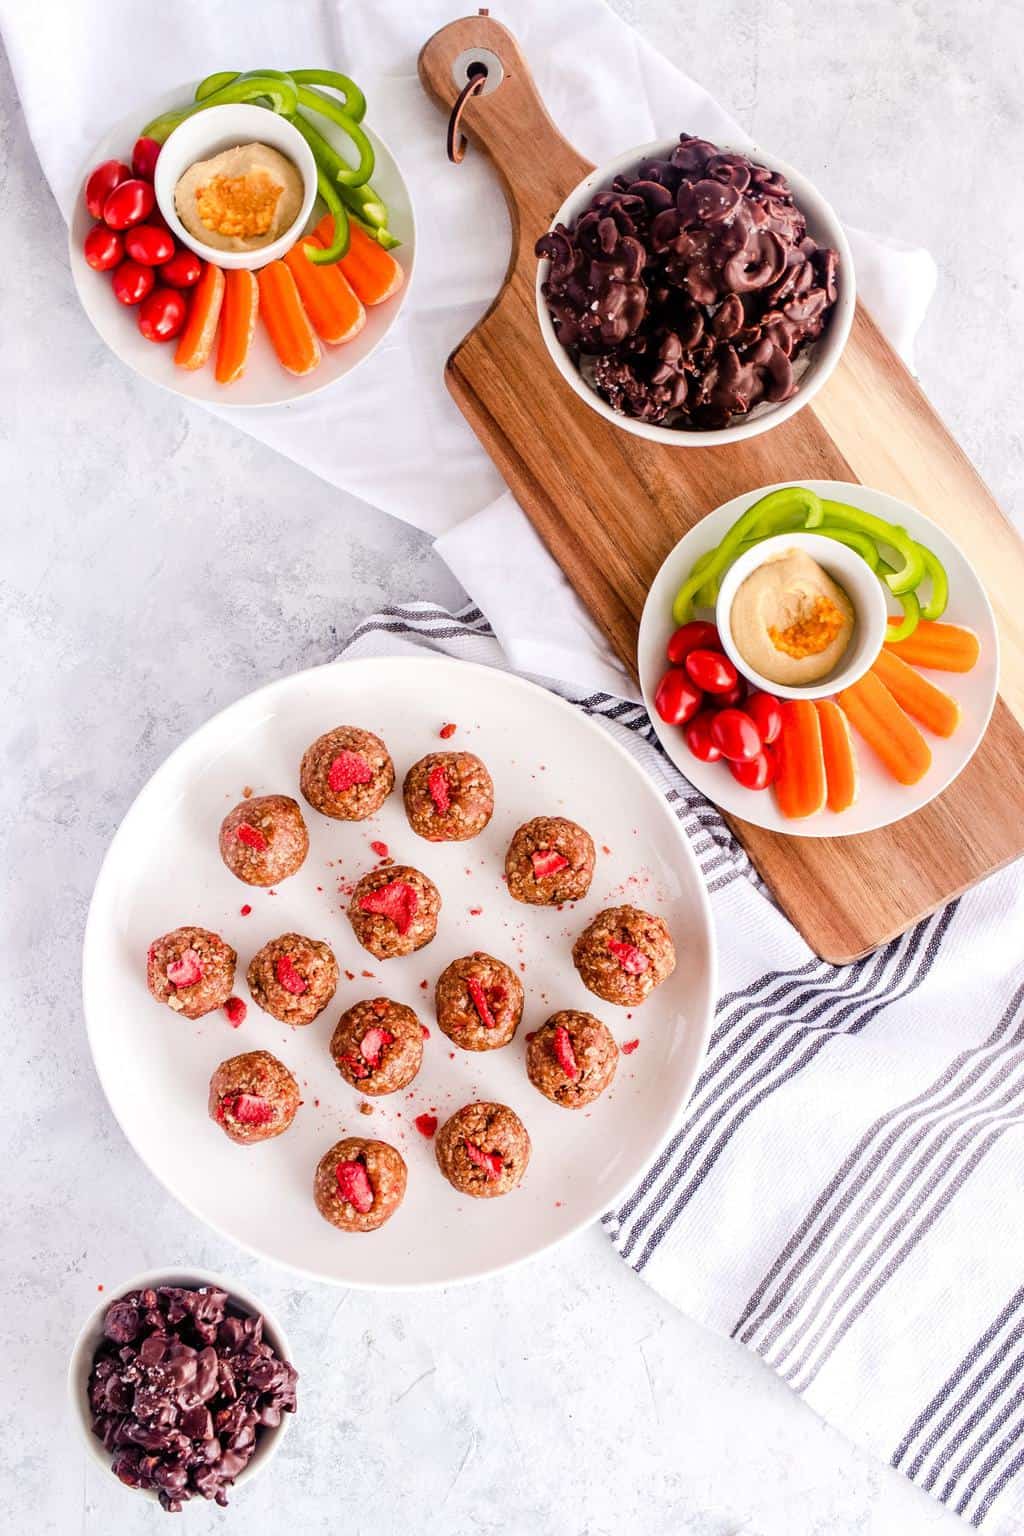 Three Snacks Under 300 Calories Recipe by top Houston lifestyle blogger Ashley Rose of Sugar & Cloth